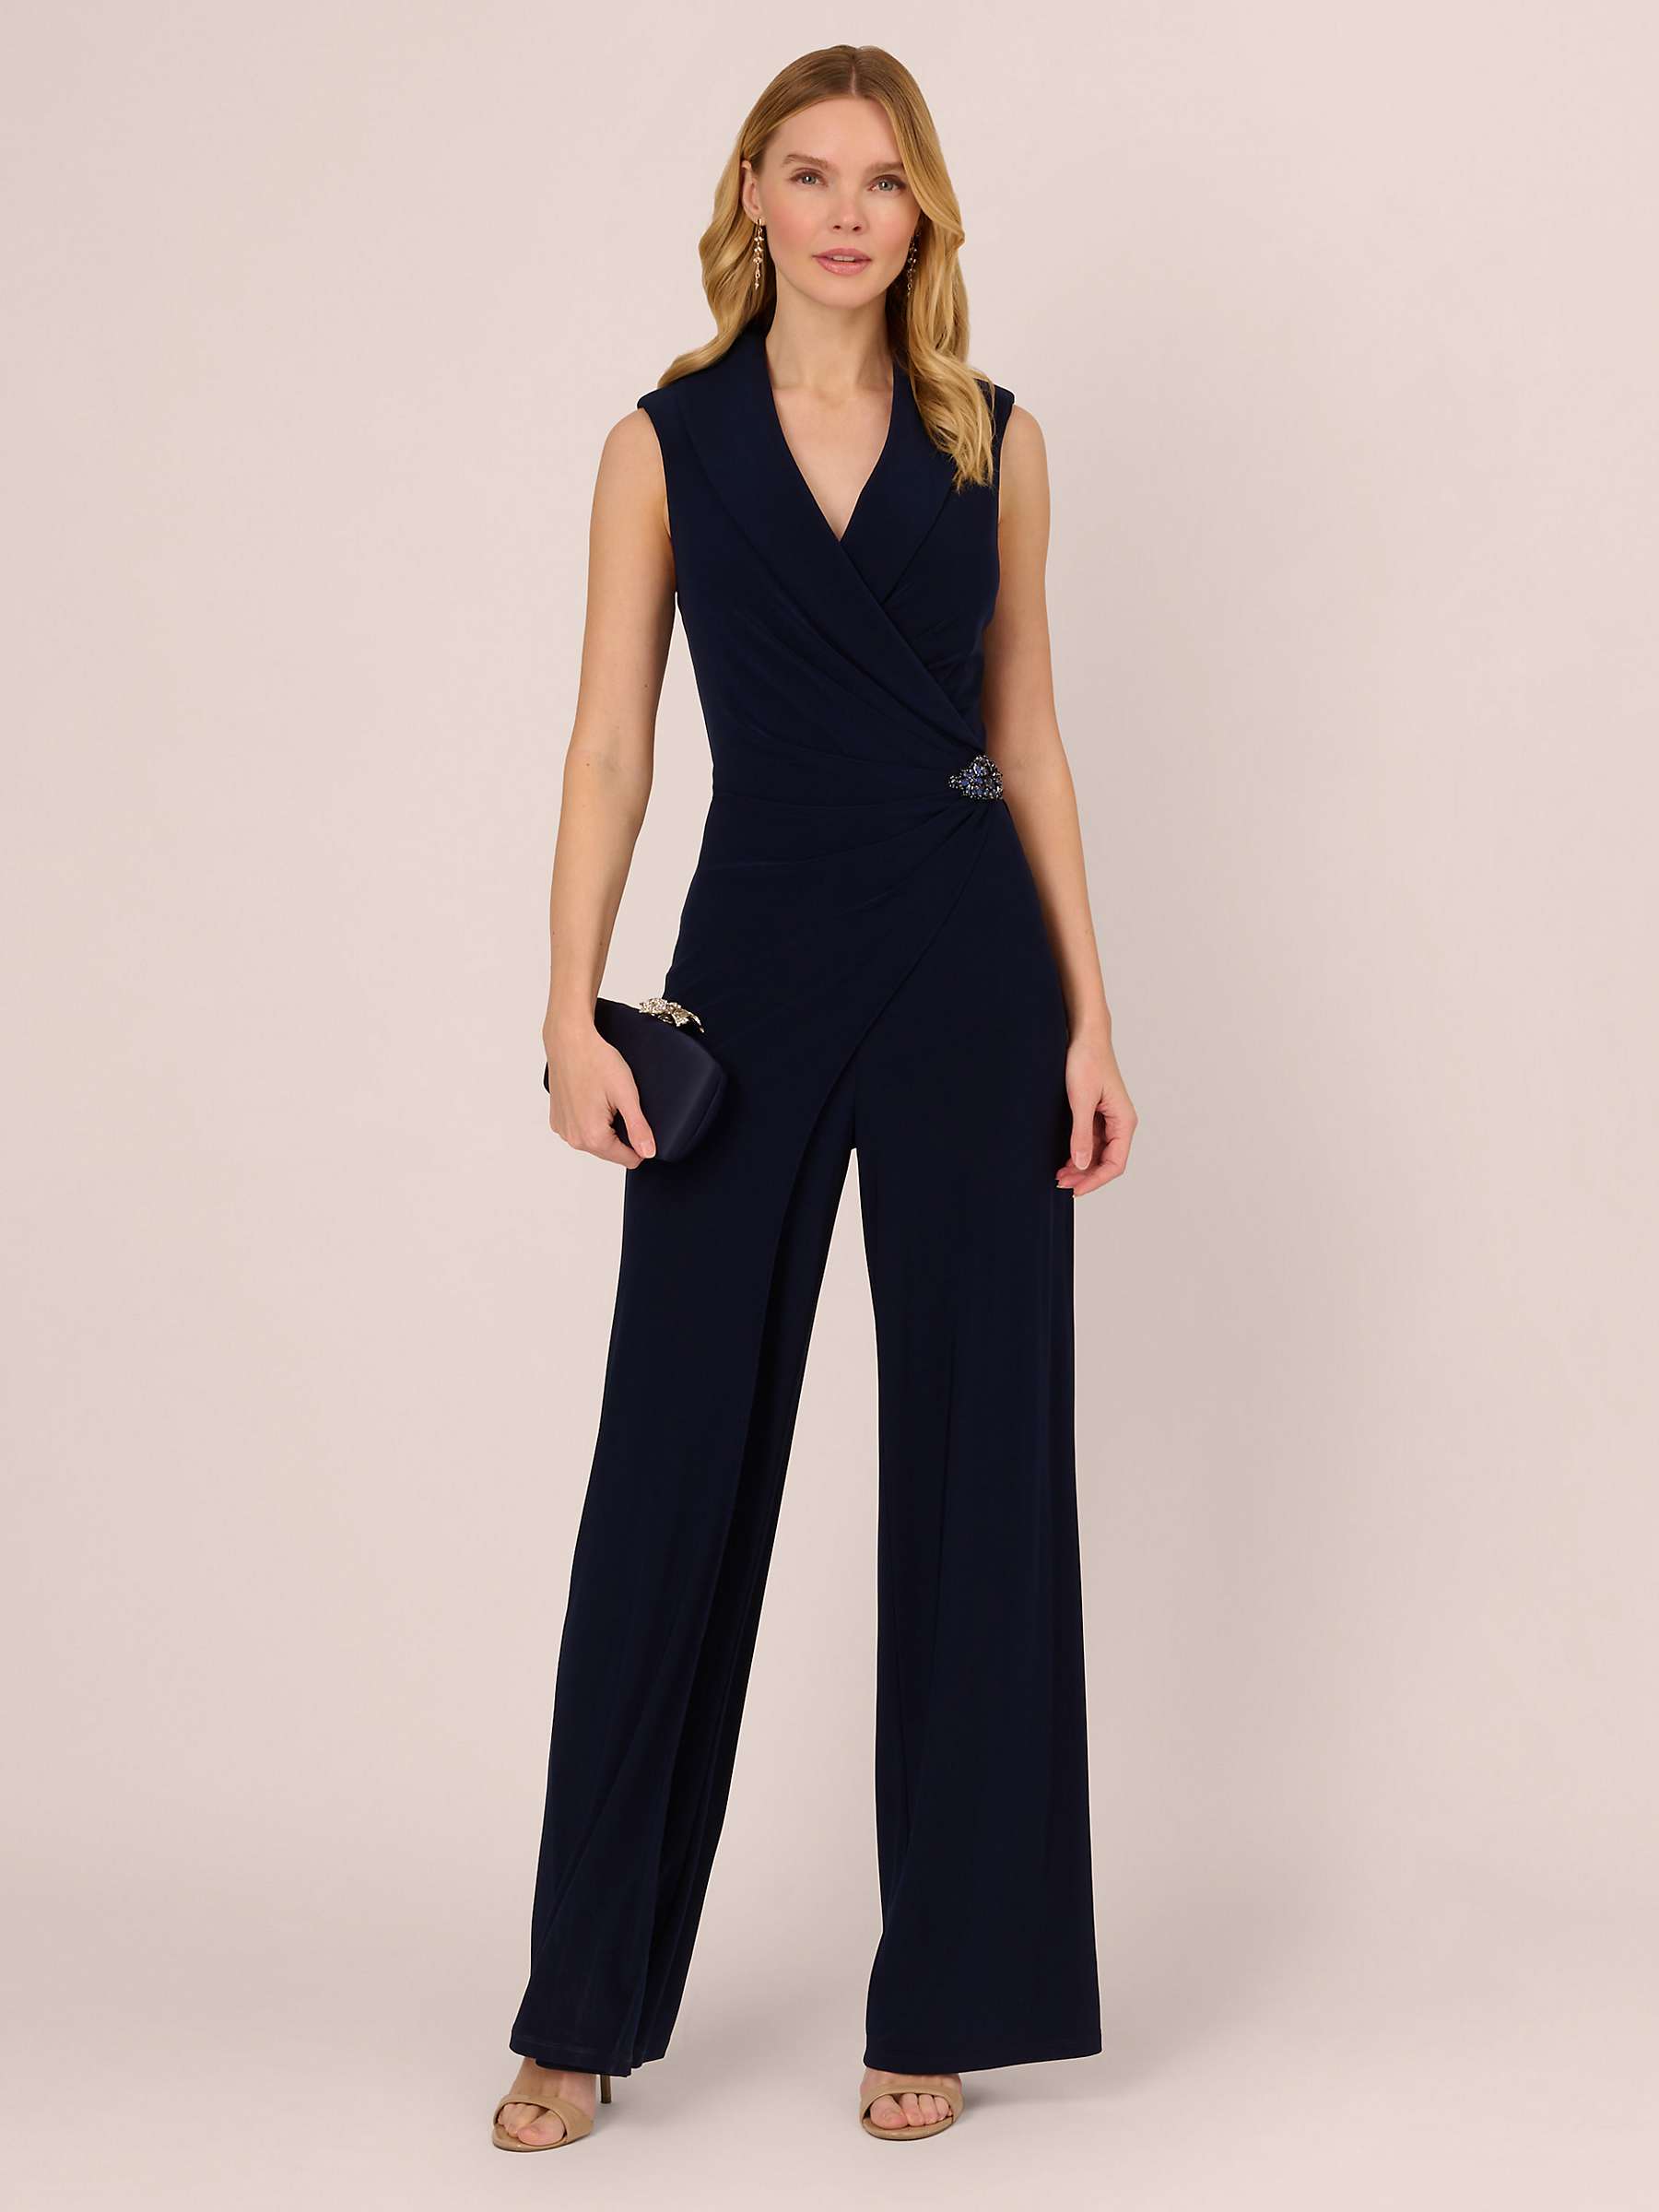 Buy Adrianna Papell Embellished Tuxedo Jersey Jumpsuit, Midnight Online at johnlewis.com